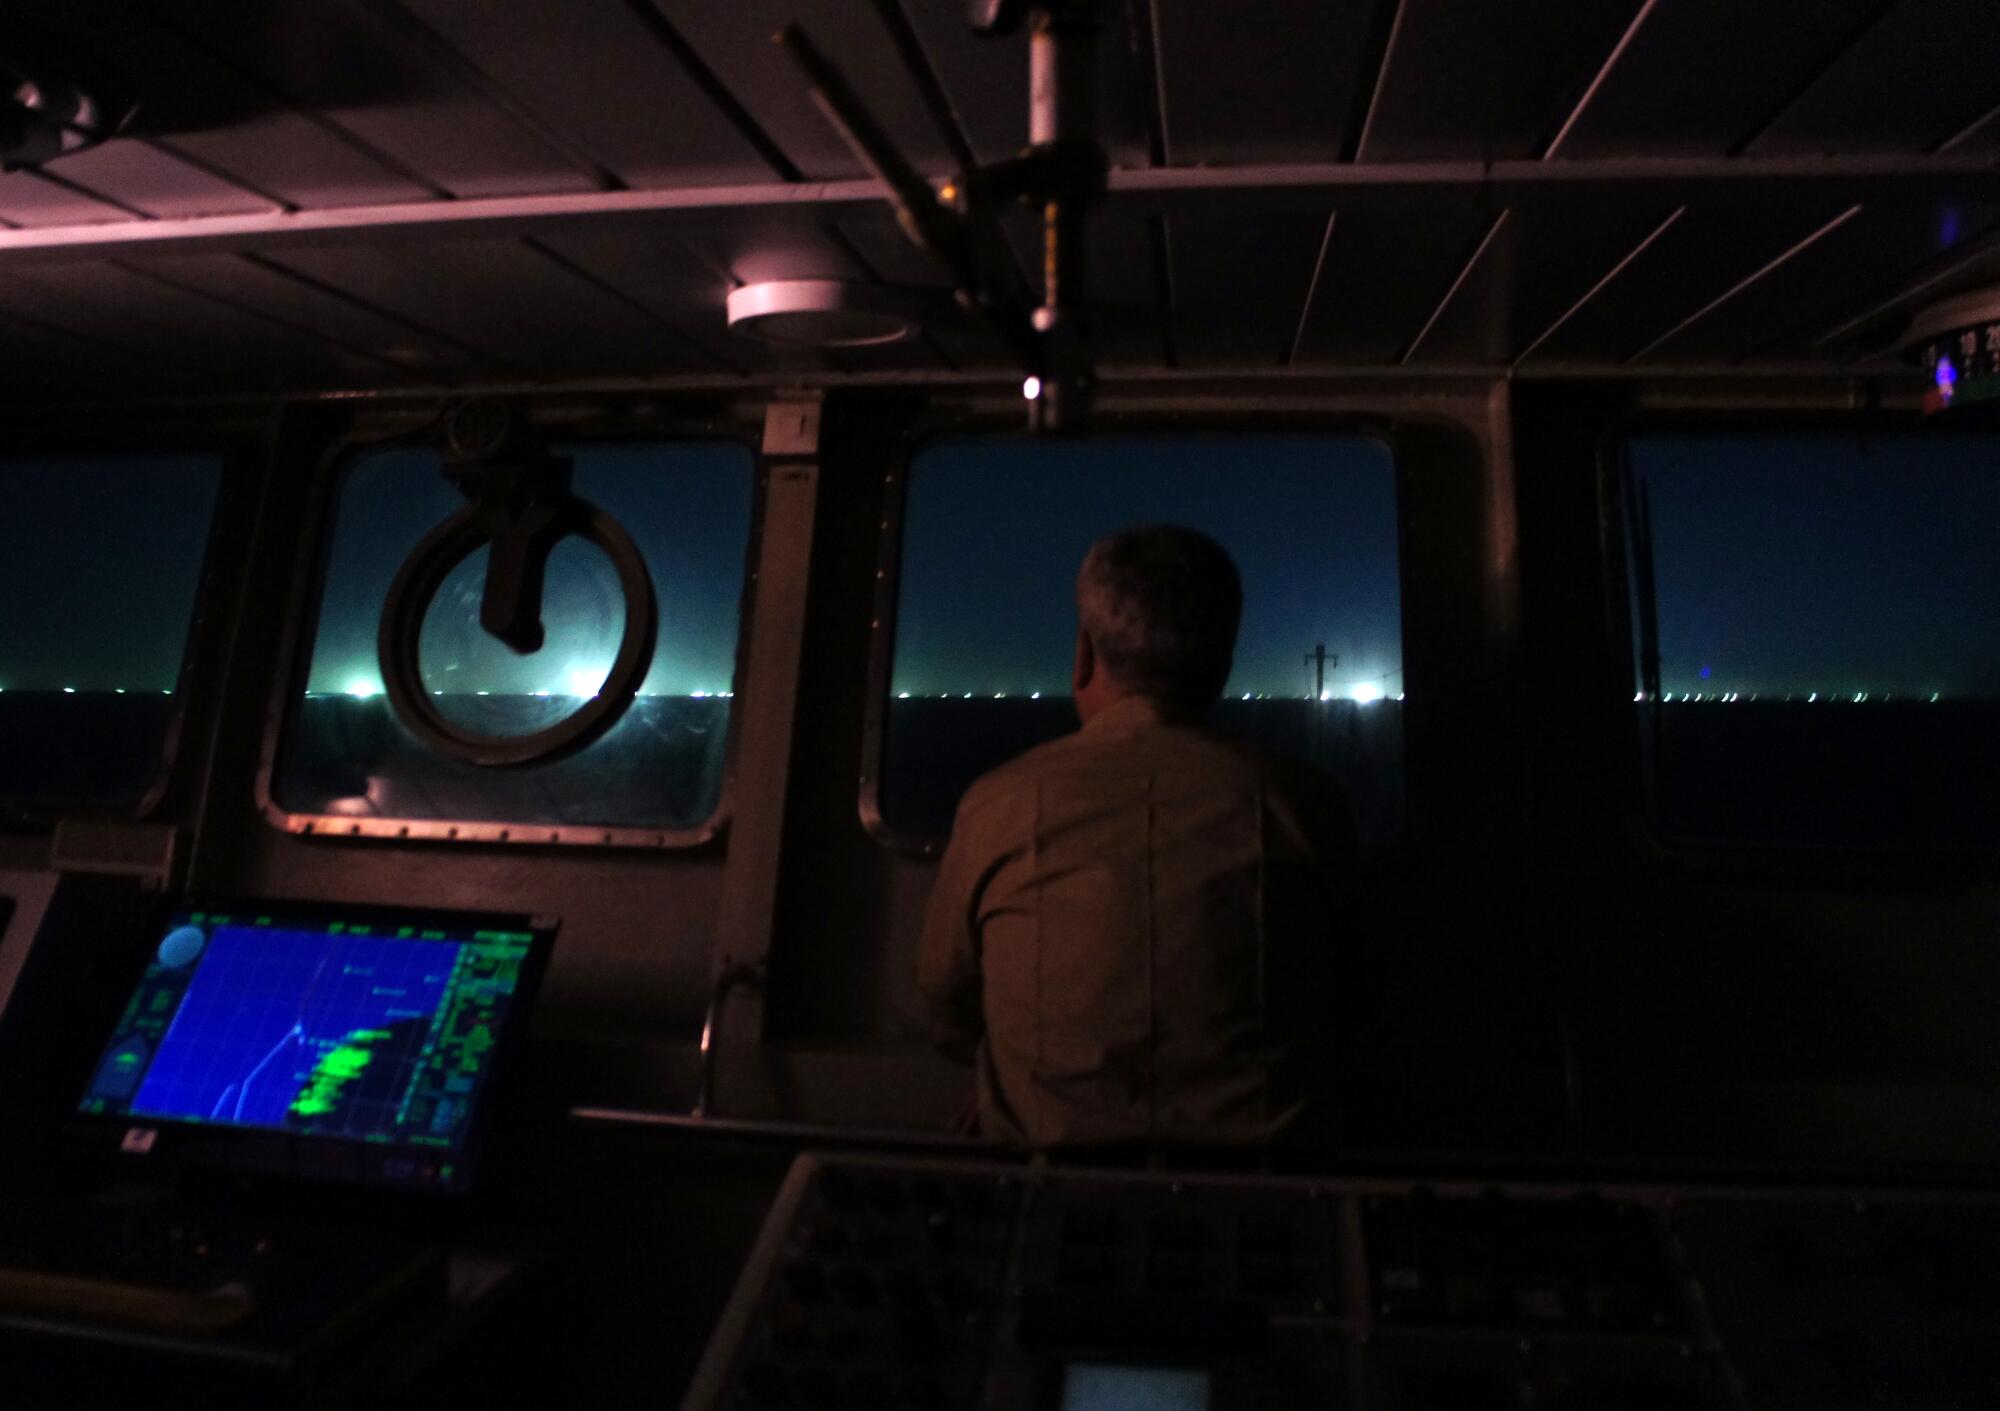 A person stands near the controls of a boat looking out at bright lights in the distance